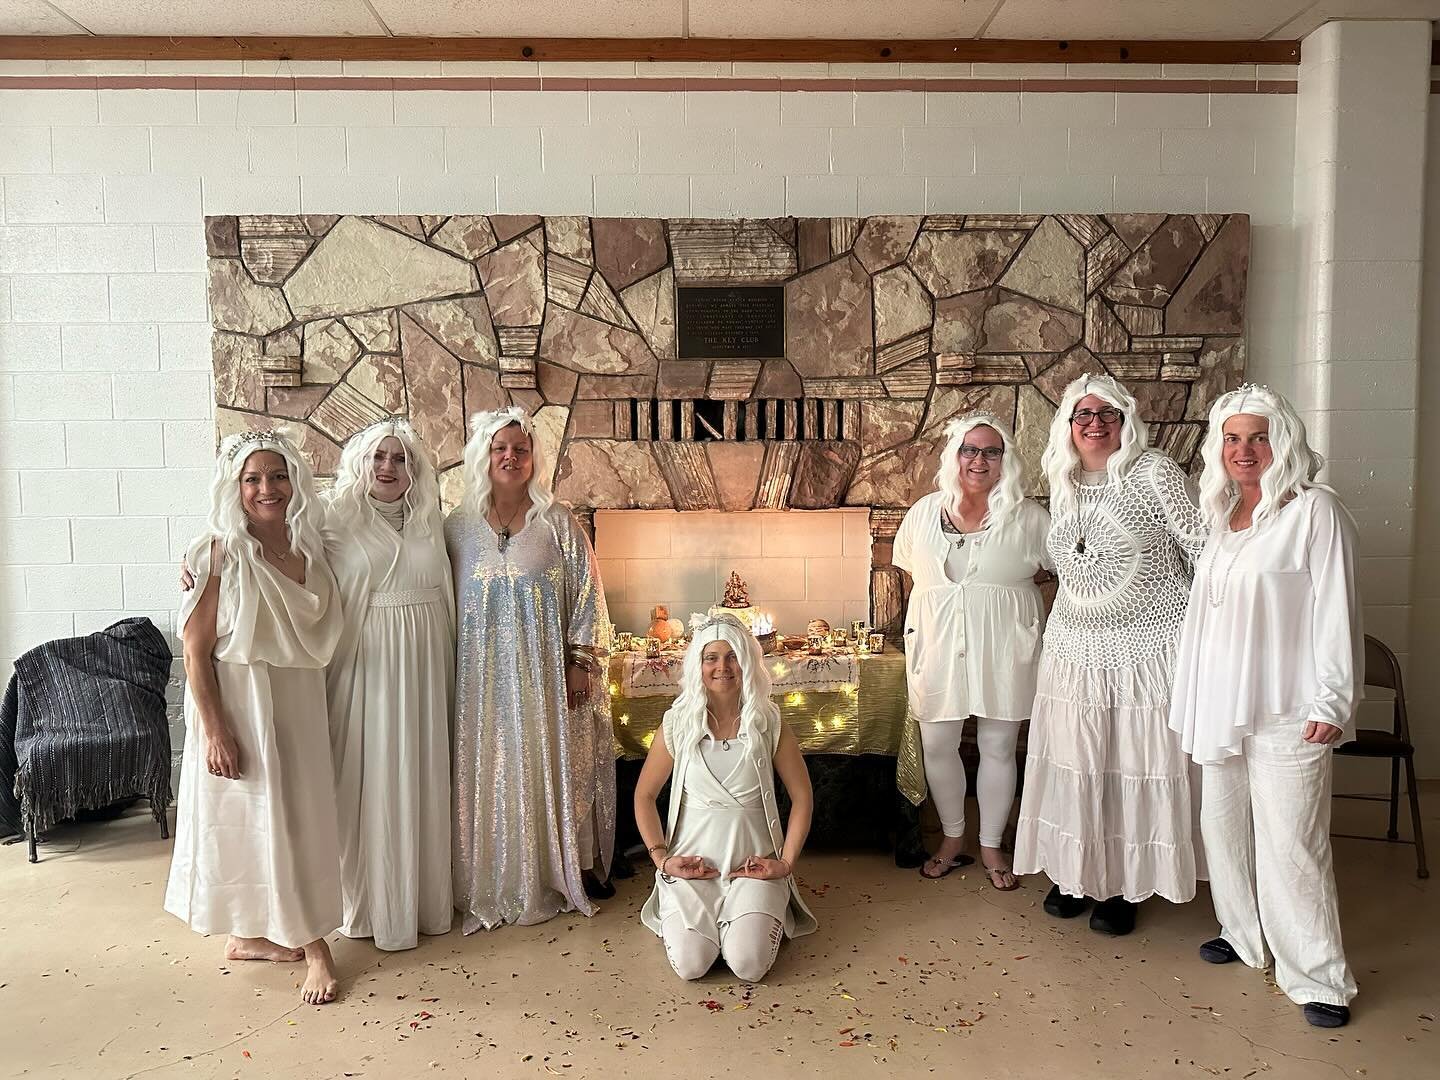 The Mt Shasta Goddess Temple&rsquo;s Annual Spring Symposium, Cosmogenetrix 2024 - Ourania: Queen of Stars happened! 

The videos for this year&rsquo;s Cosmogenetrix workshops will soon be available on the Mt Shasta Goddess Temple website!

We had a 